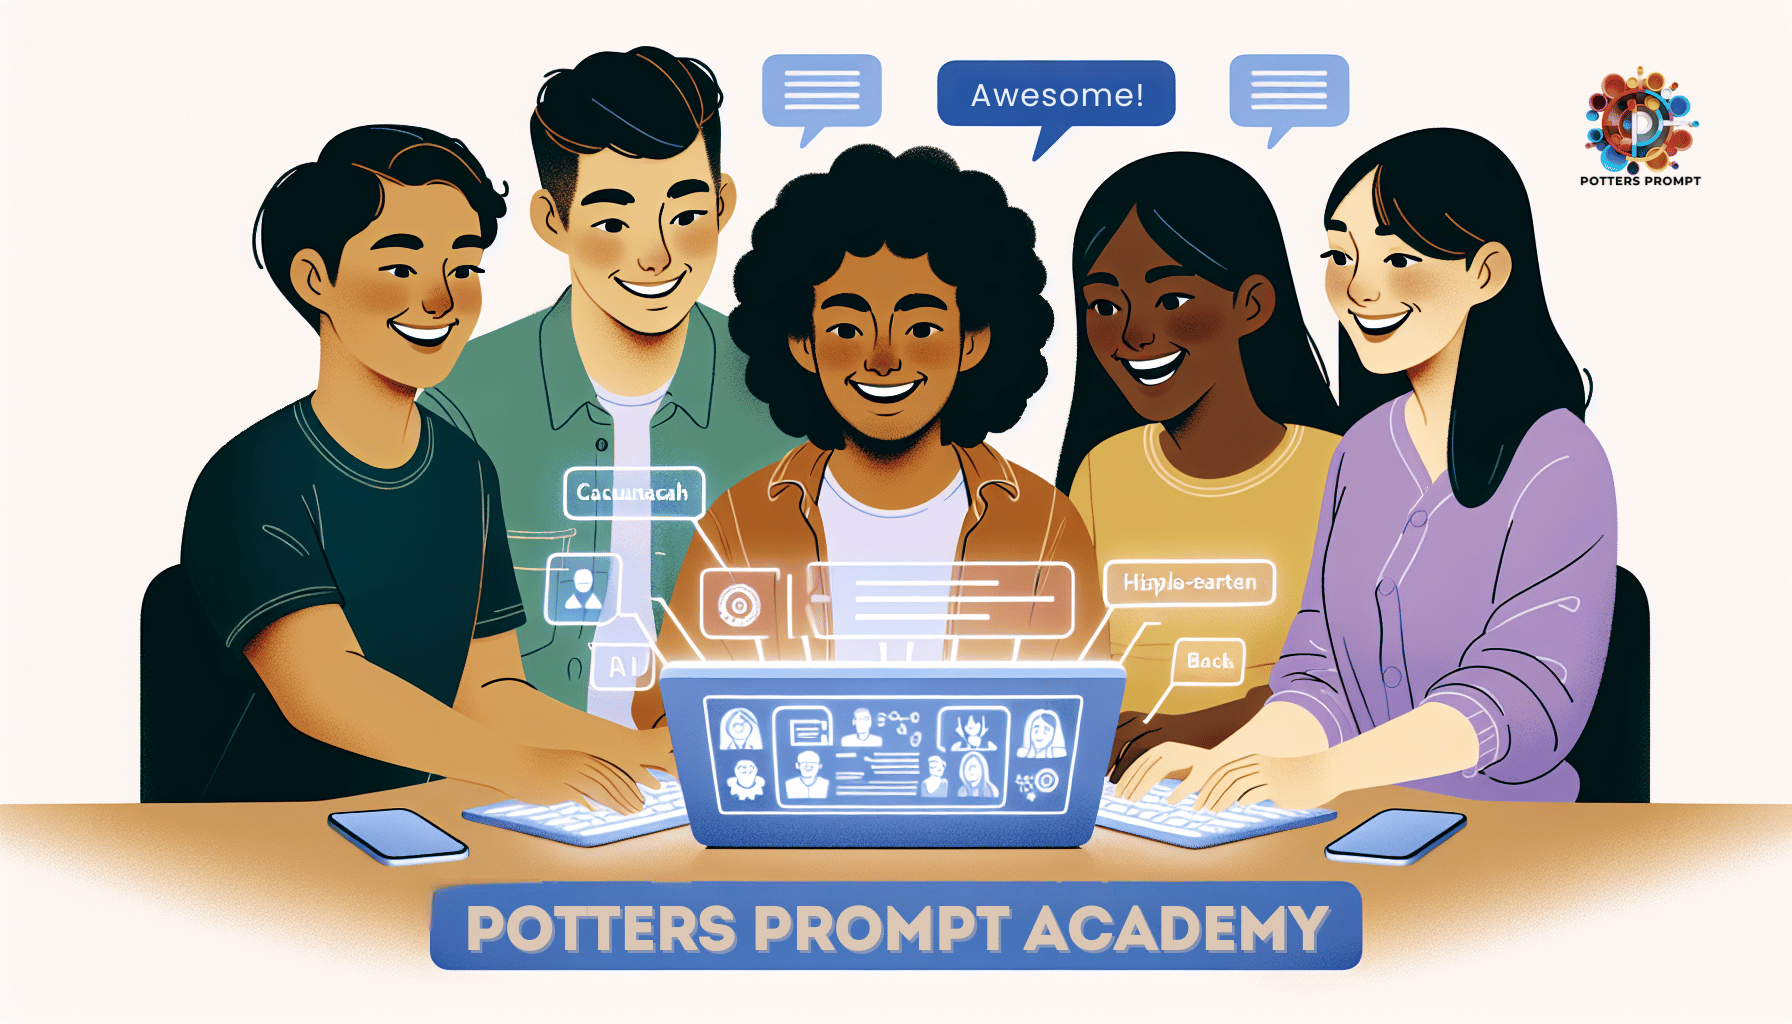 Potters Prompt Academy